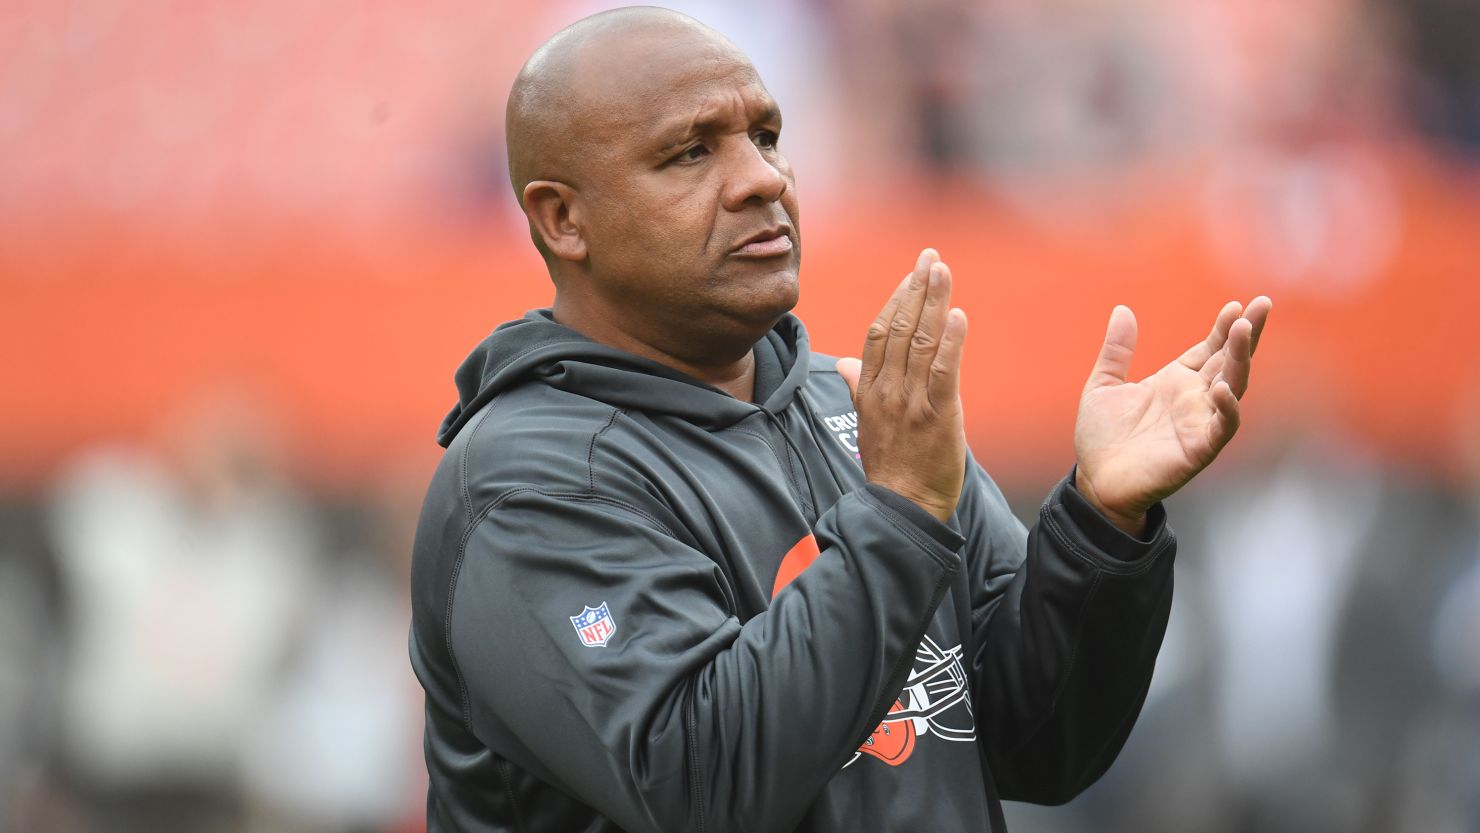 Hue Jackson had a record of 3-36-1 as head coach of the Cleveland Browns